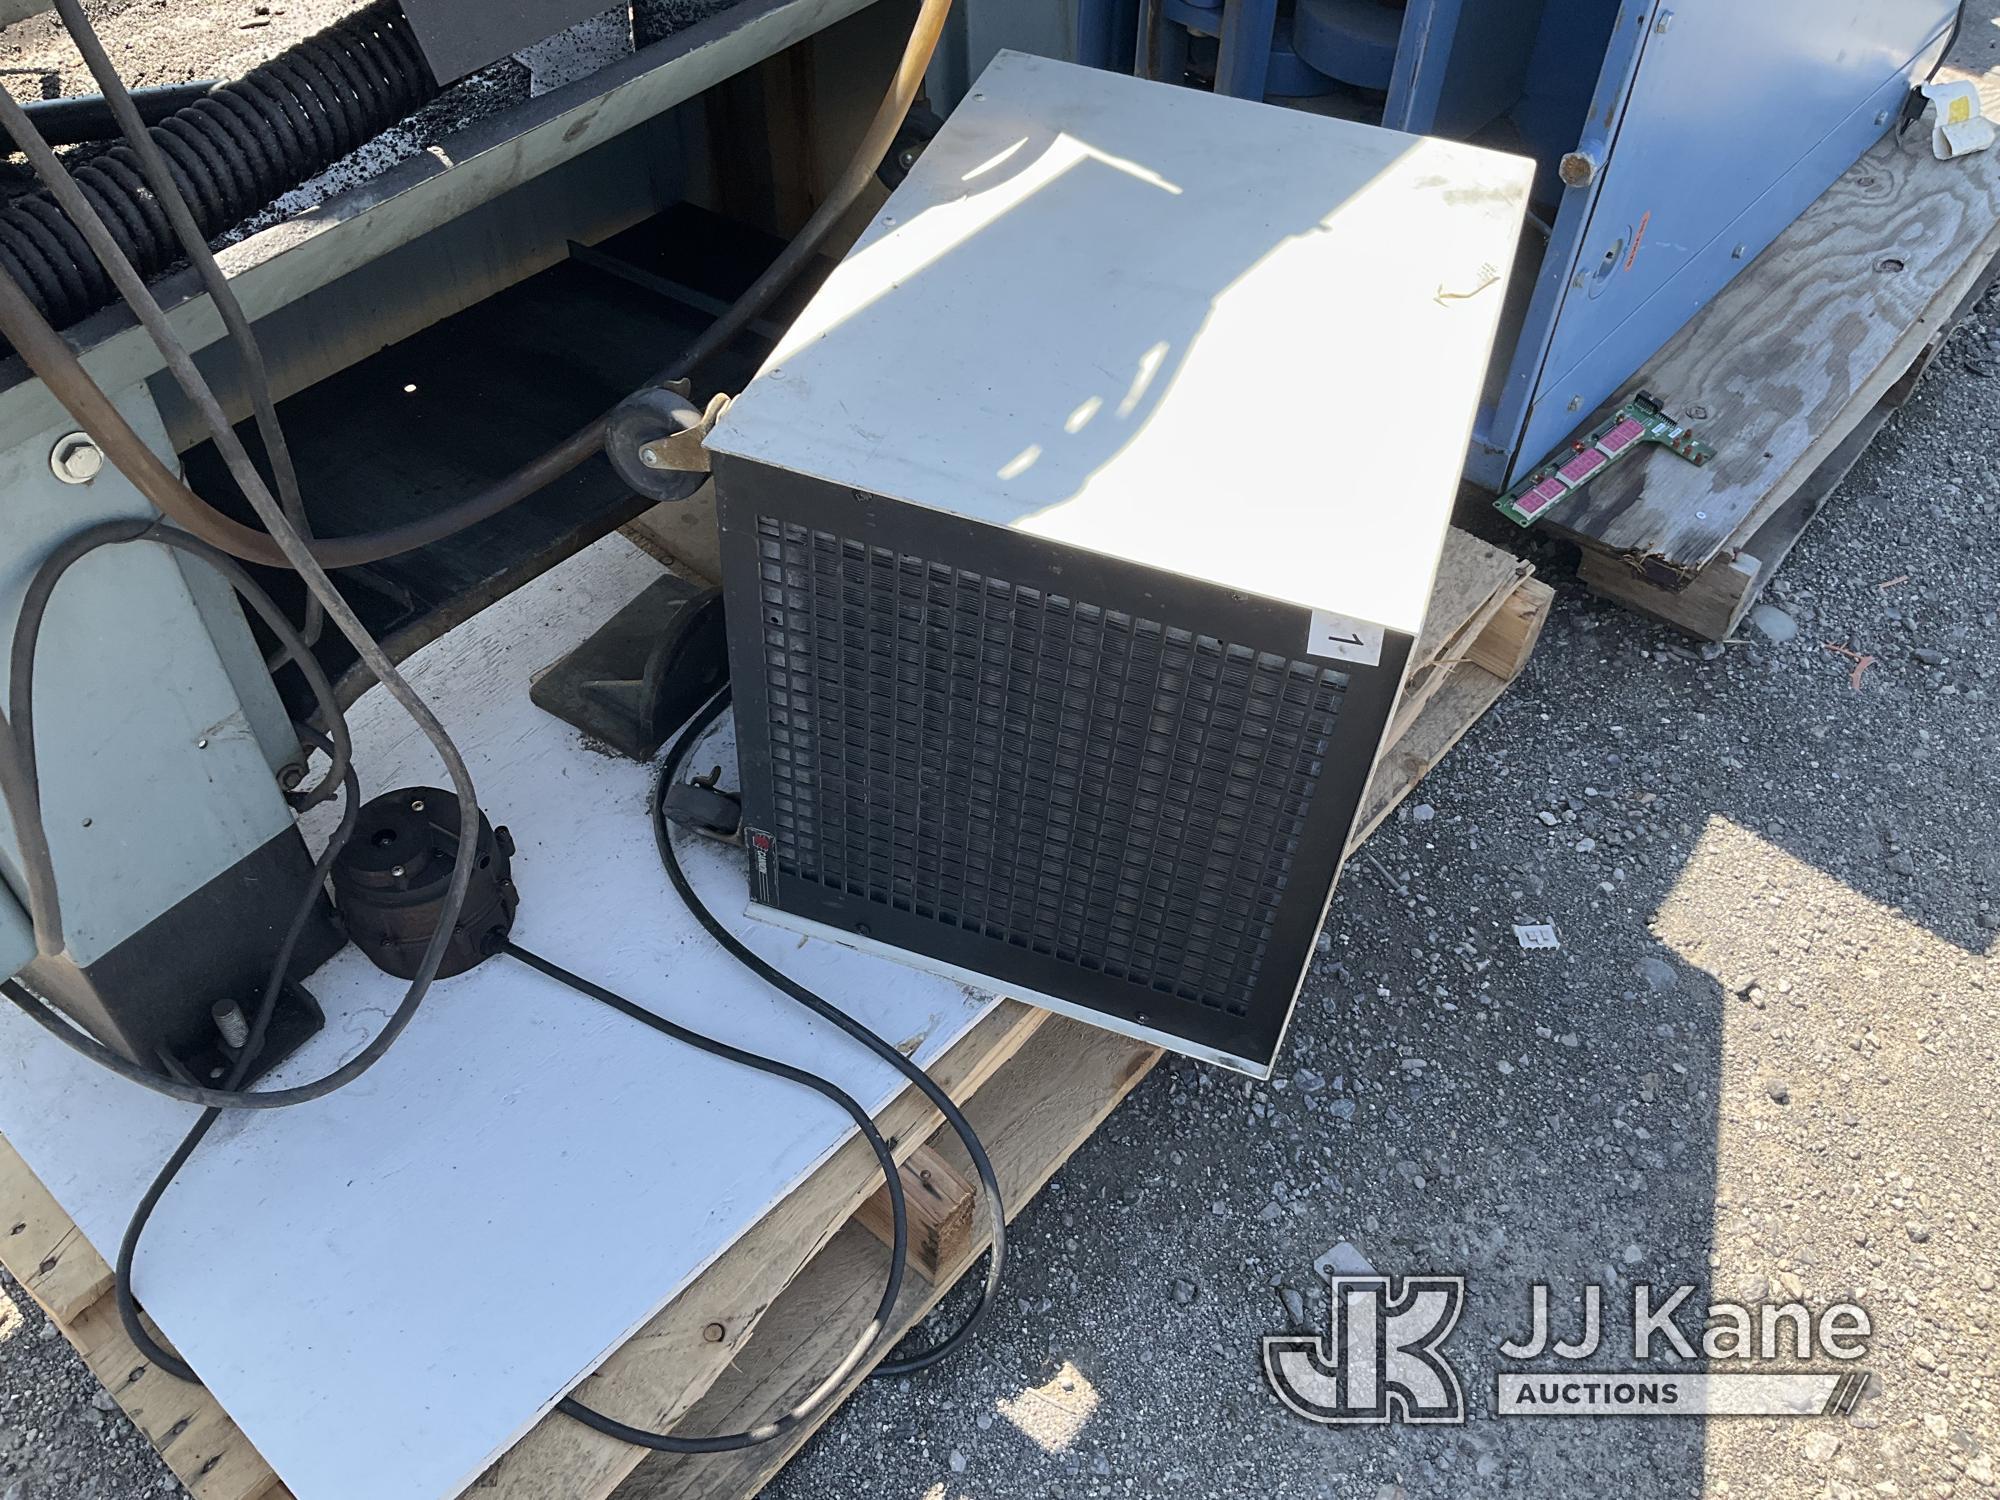 (Jurupa Valley, CA) Delta Band Saw & Cannon Heater (Used) NOTE: This unit is being sold AS IS/WHERE